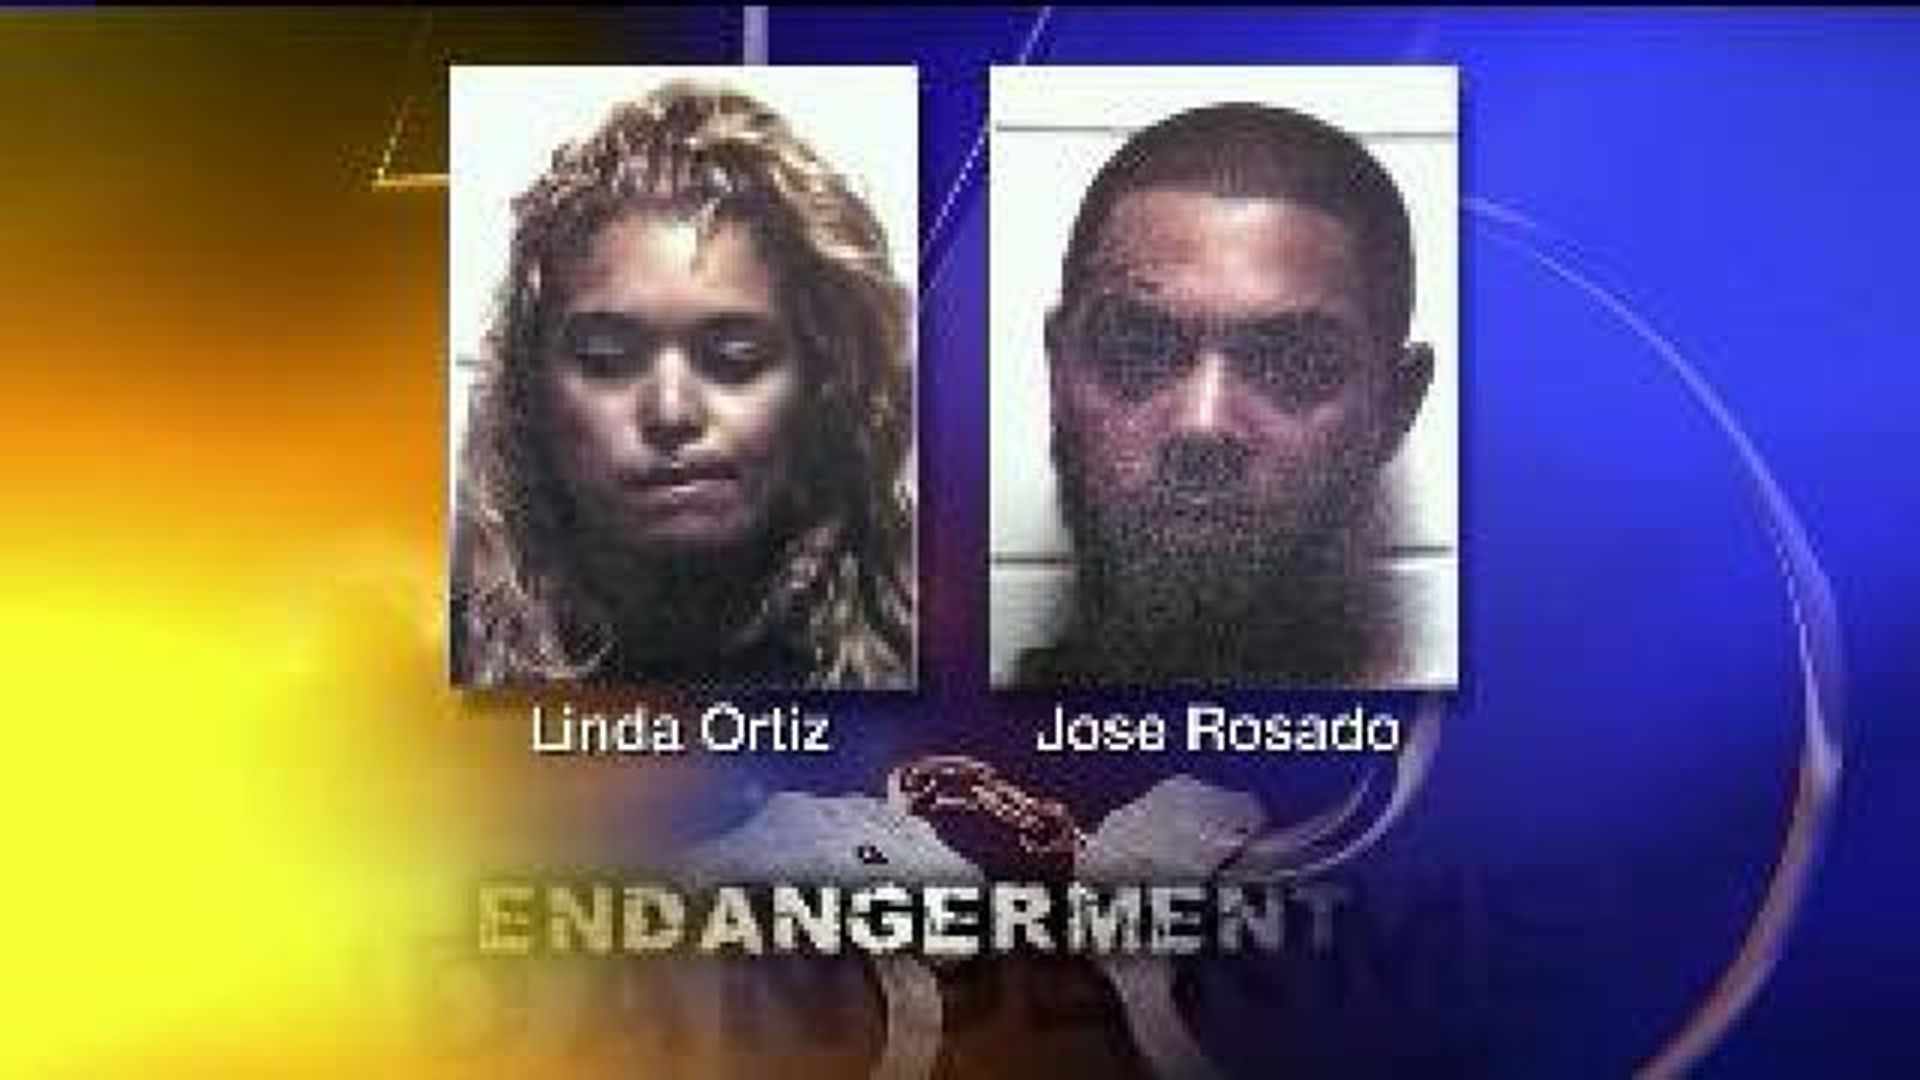 Police: Parents Accused of Dealing Drugs, Mistreating Children